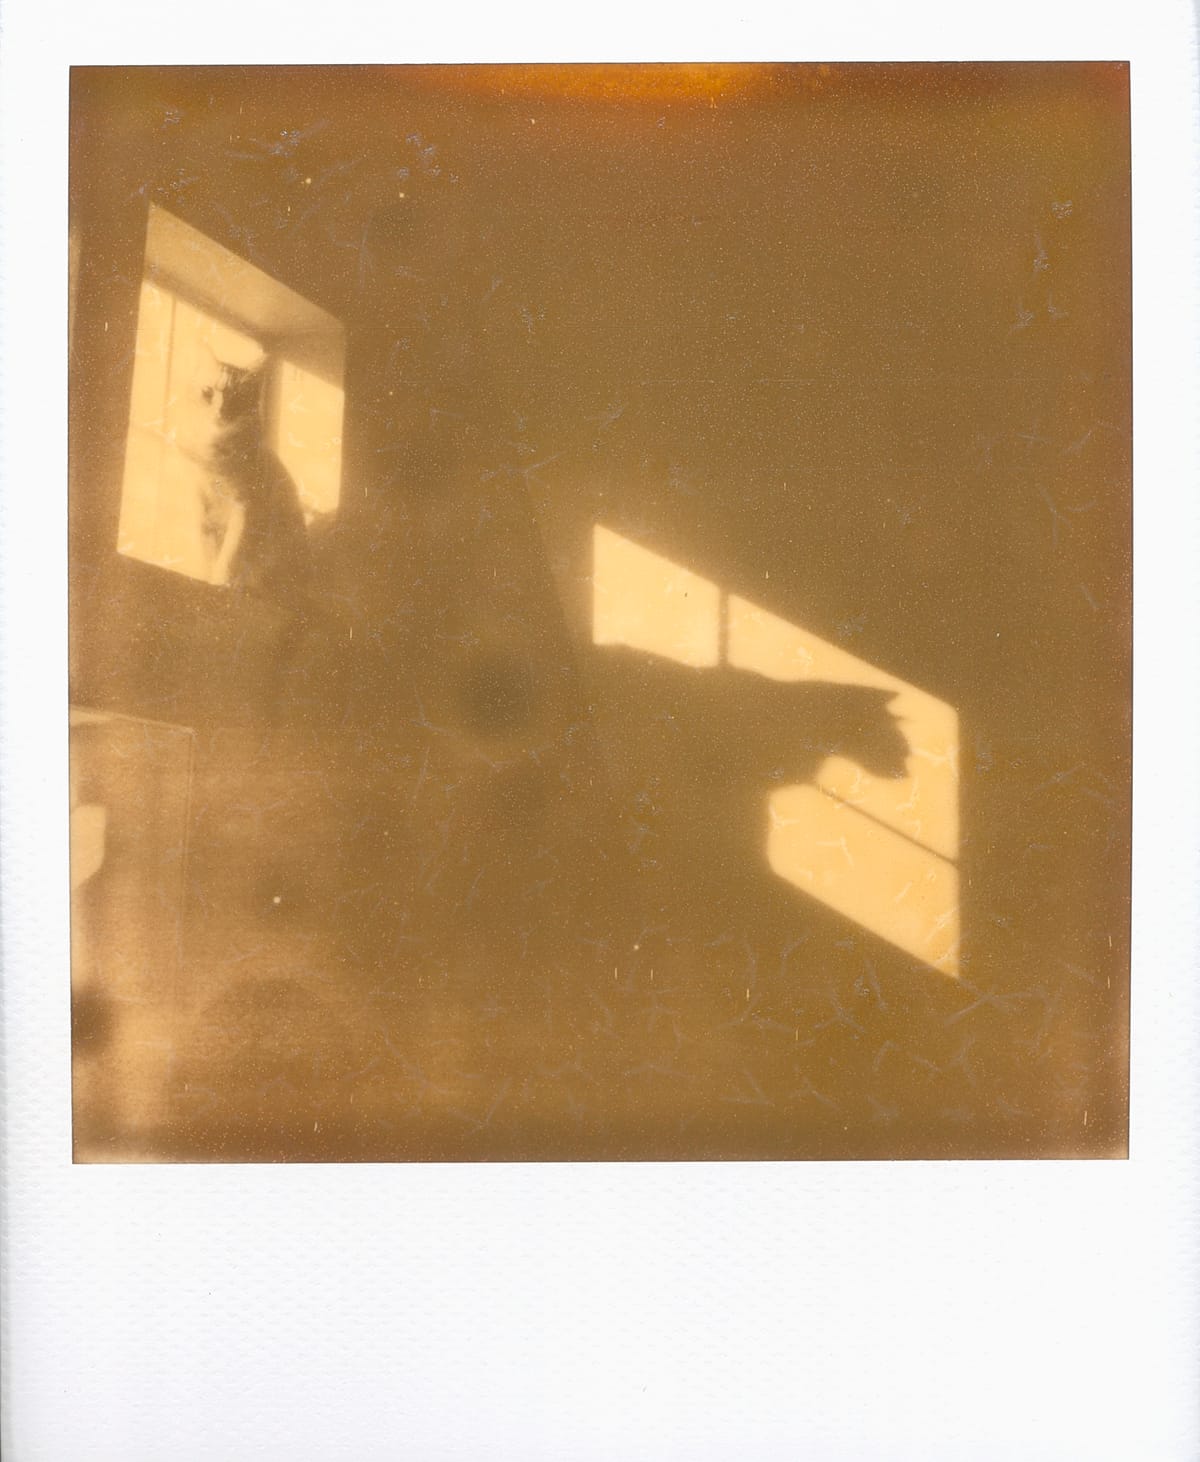 Scan of an expired instant film image of a cat sitting in a sunny window with his shadow cast on the wall to the right